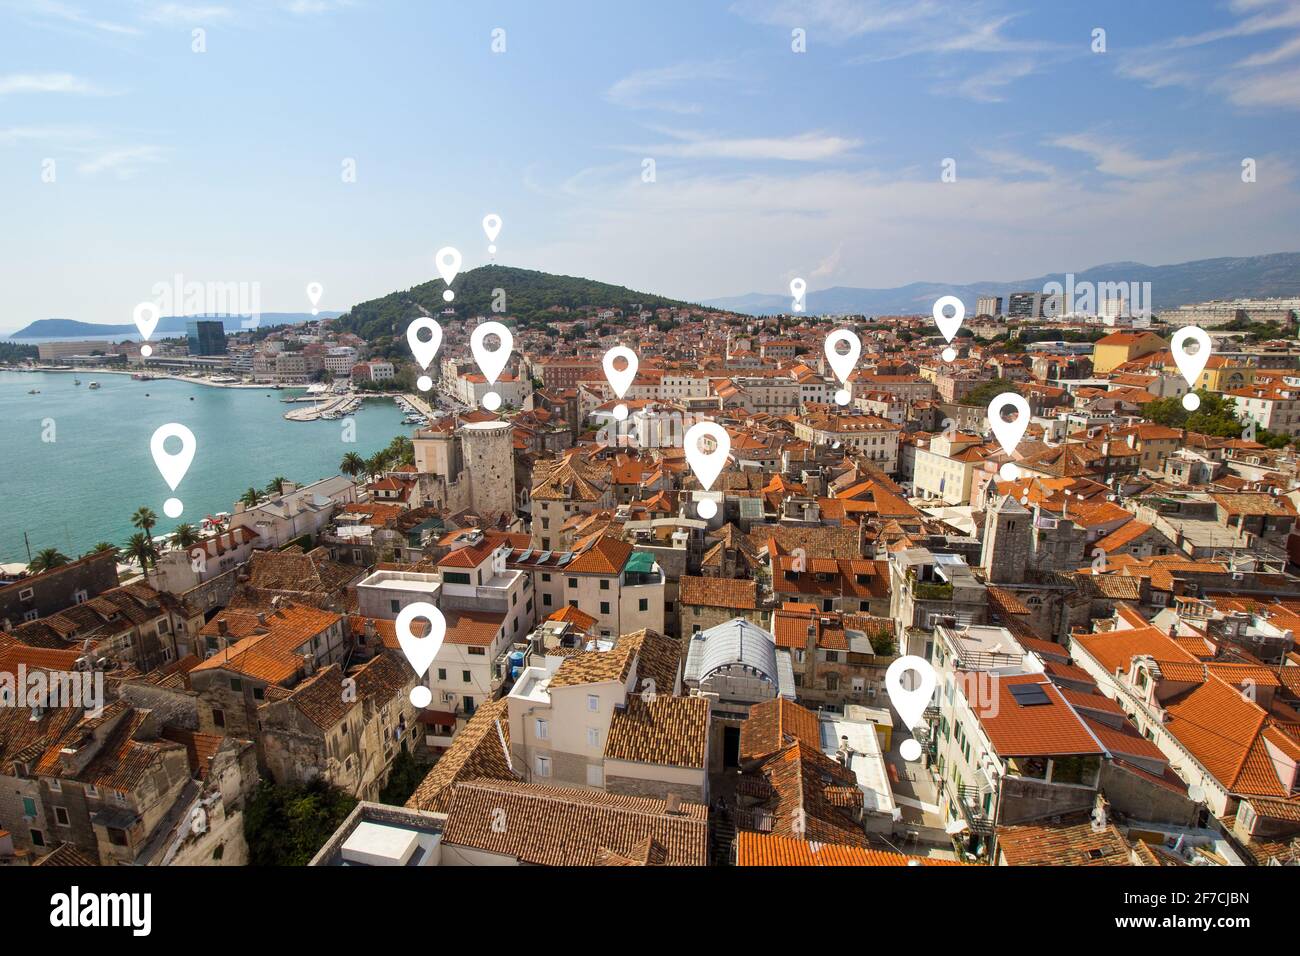 Map pin icons on Split's cityscape. View of Split's historic Diocletian's Palace, old town and Marjan hill from above in Croatia. Stock Photo